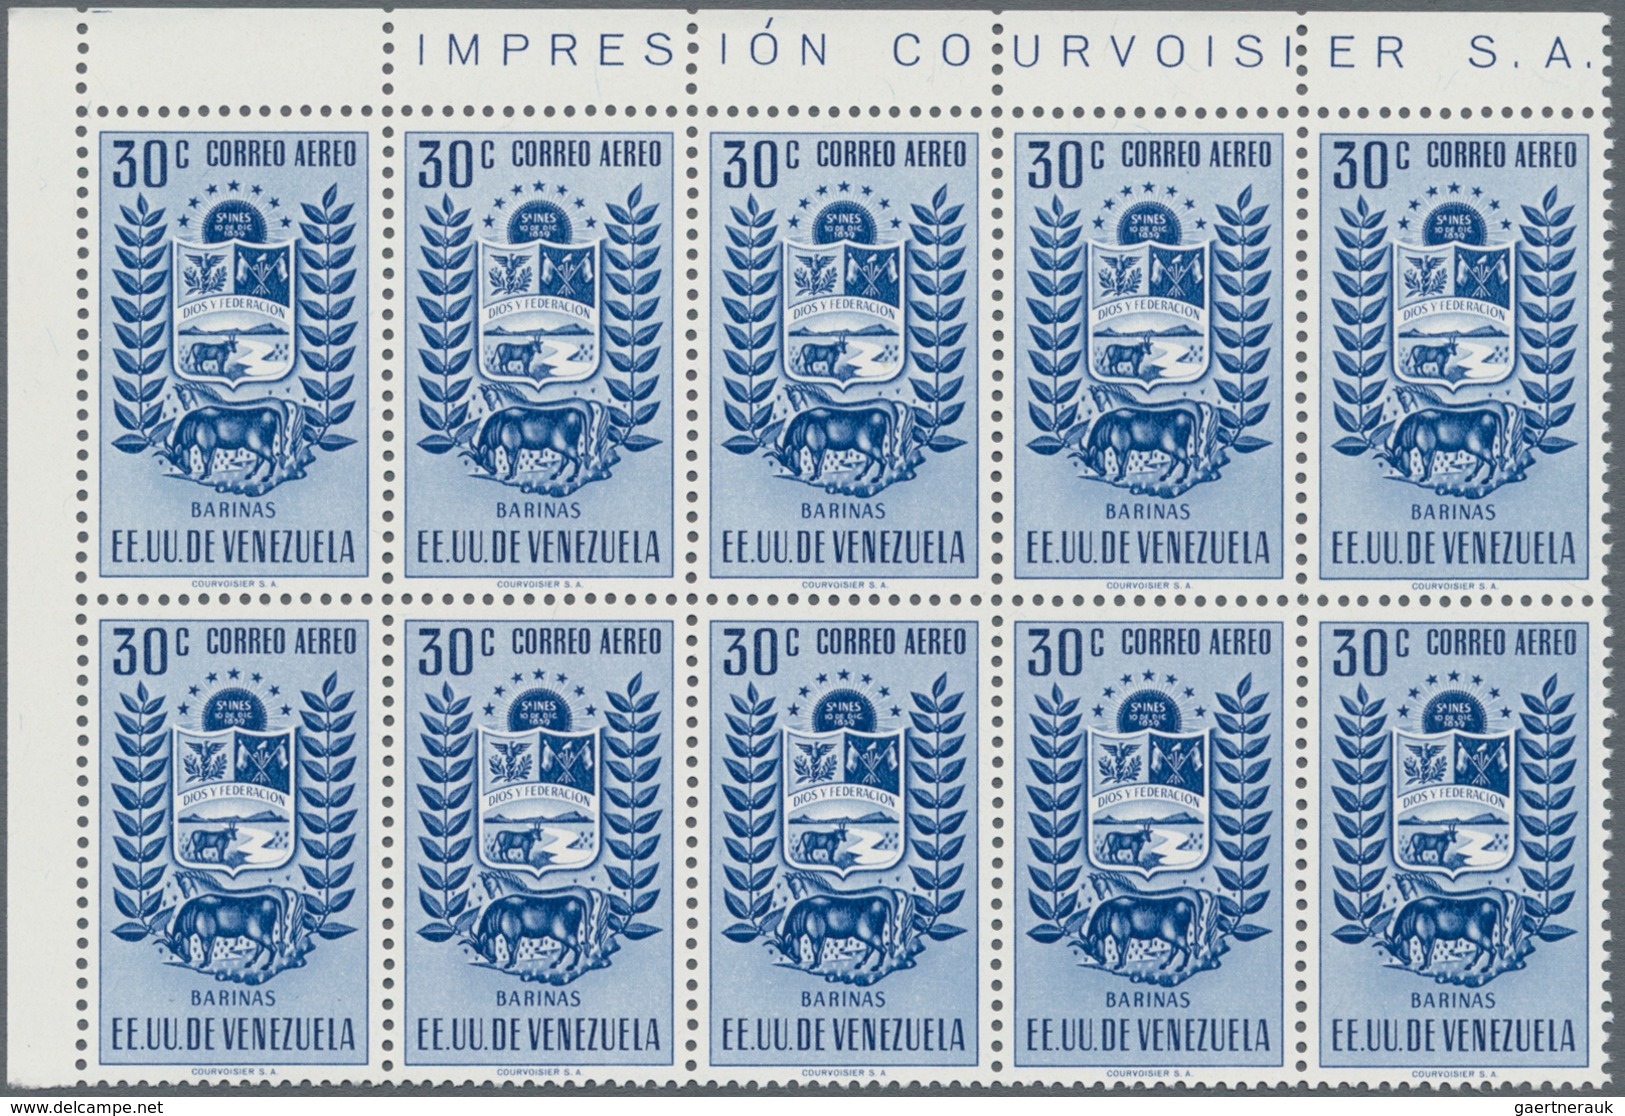 Venezuela: 1953, Coat of Arms 'BARINAS‘ airmail stamps complete set of nine in blocks of ten from di